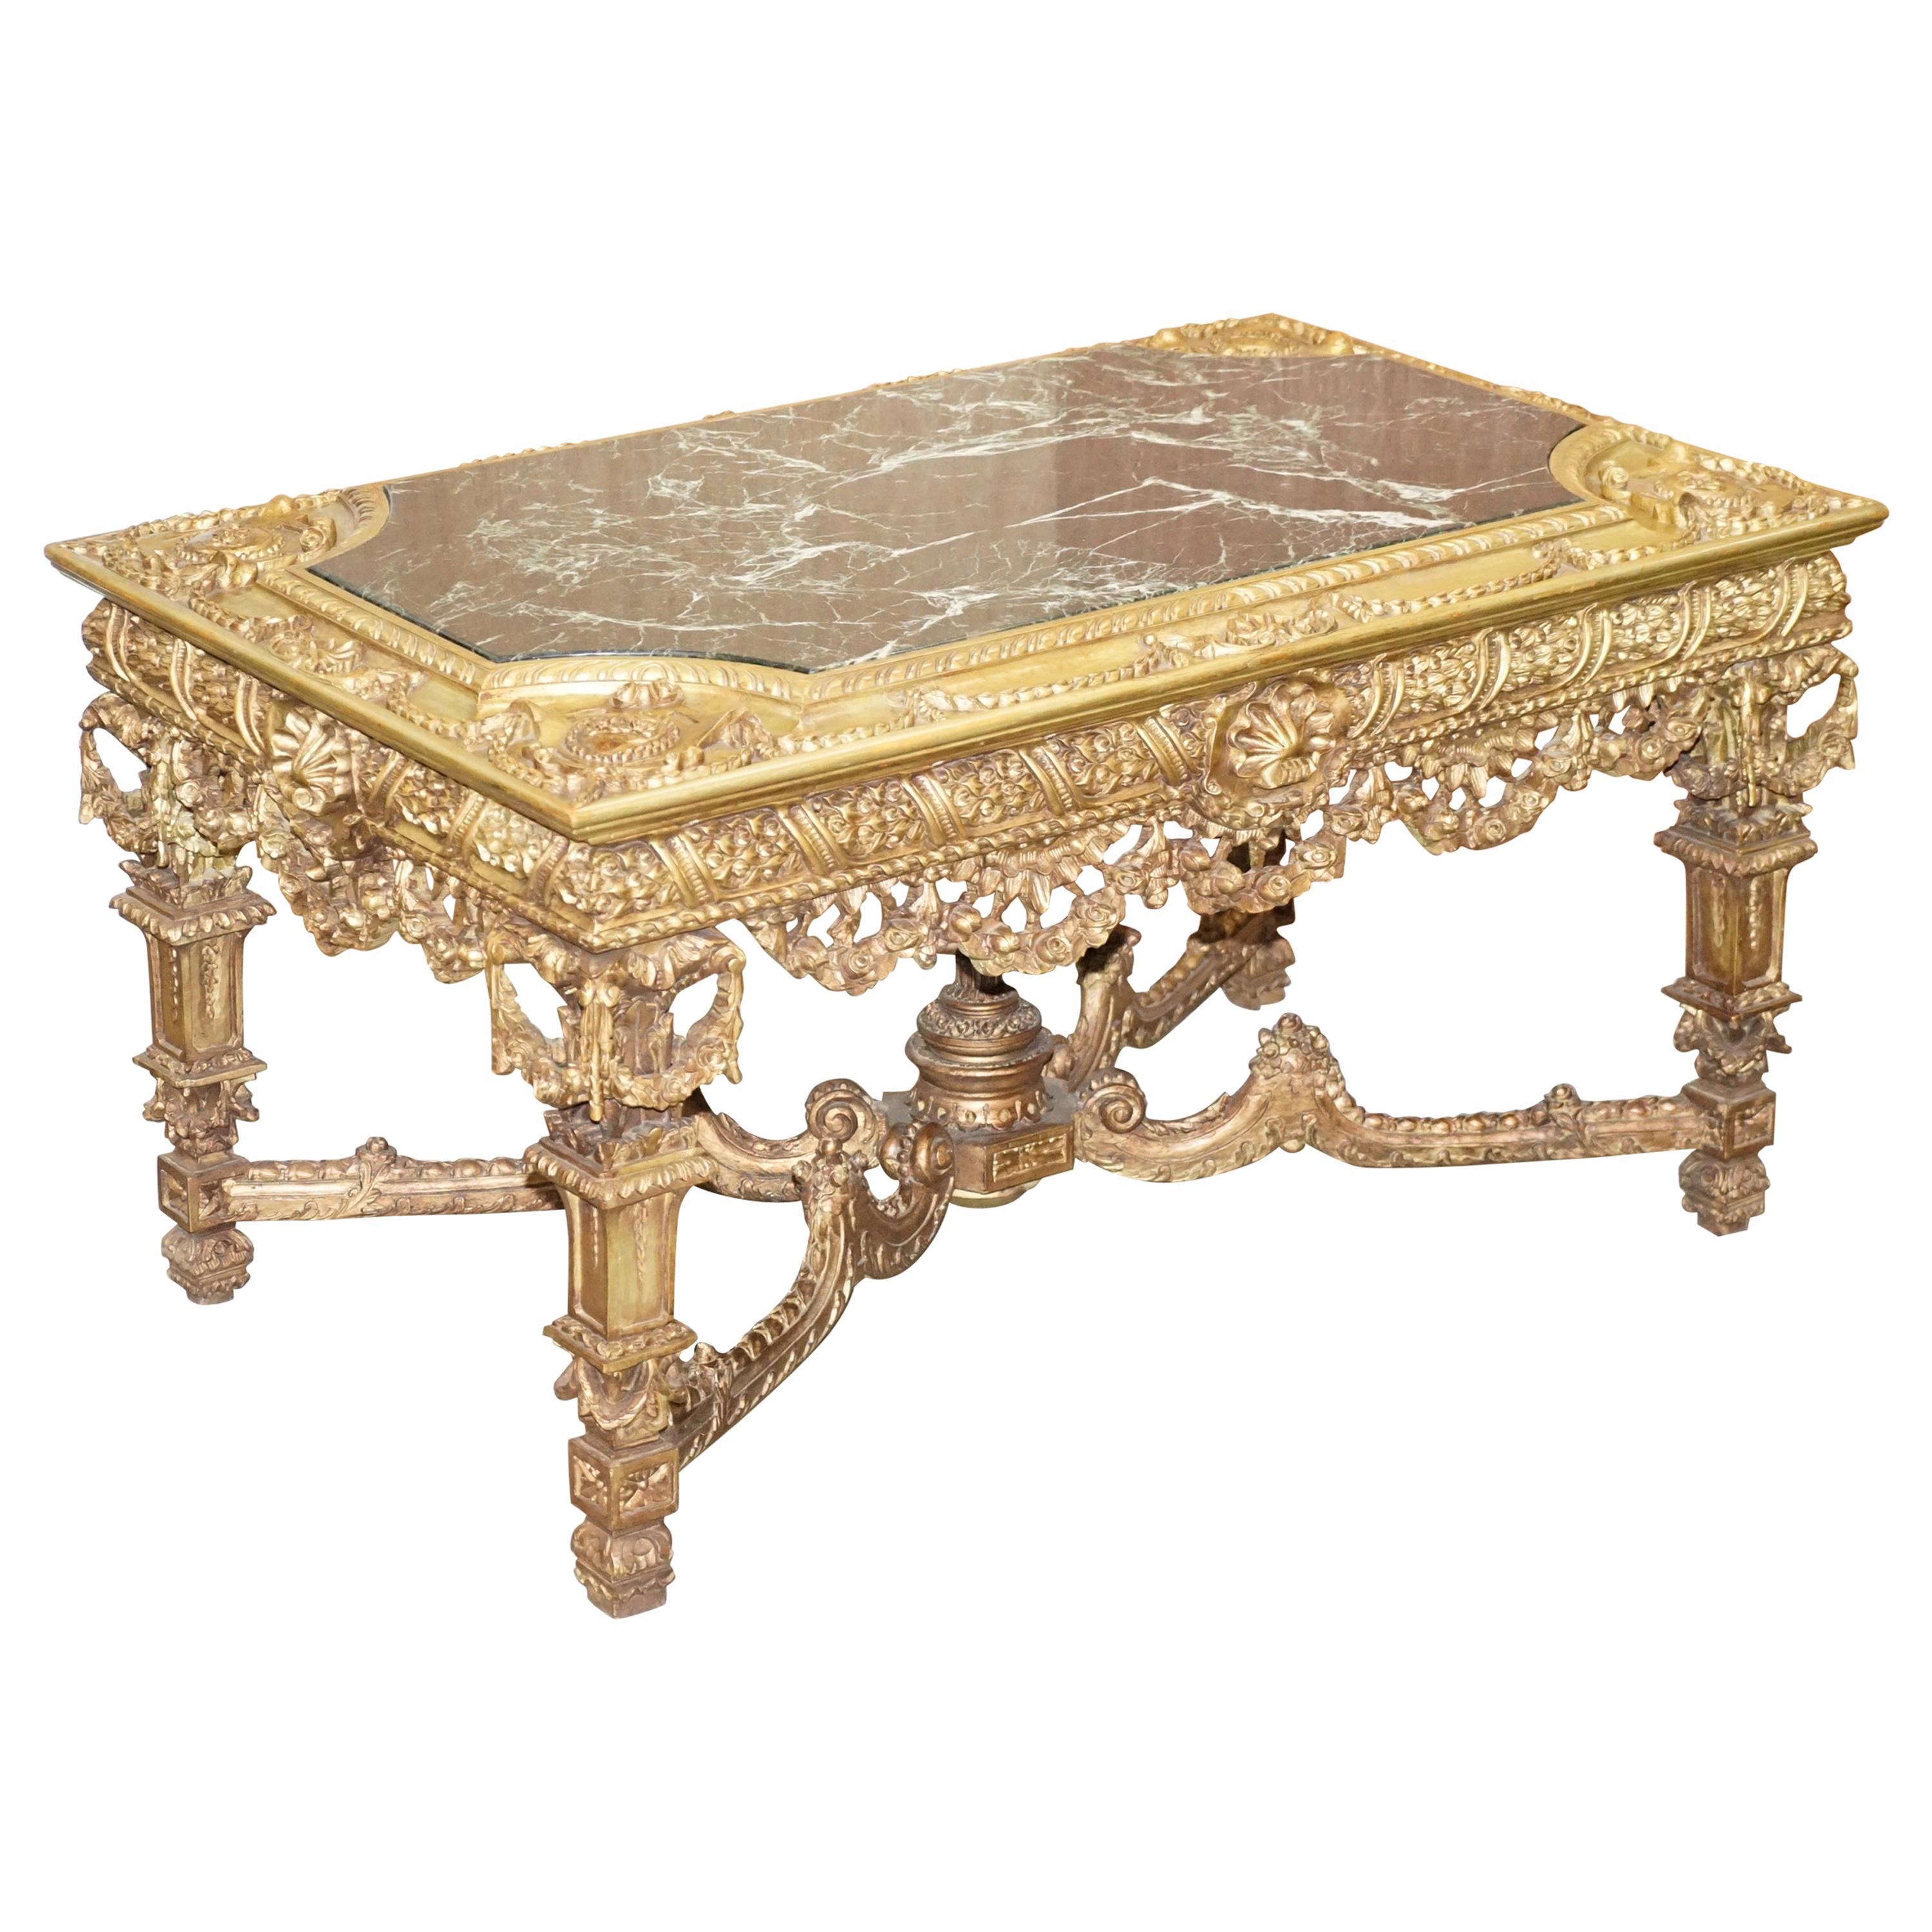 Large Important 19th Century Continetal Carved Giltwood and Marble Centre Table